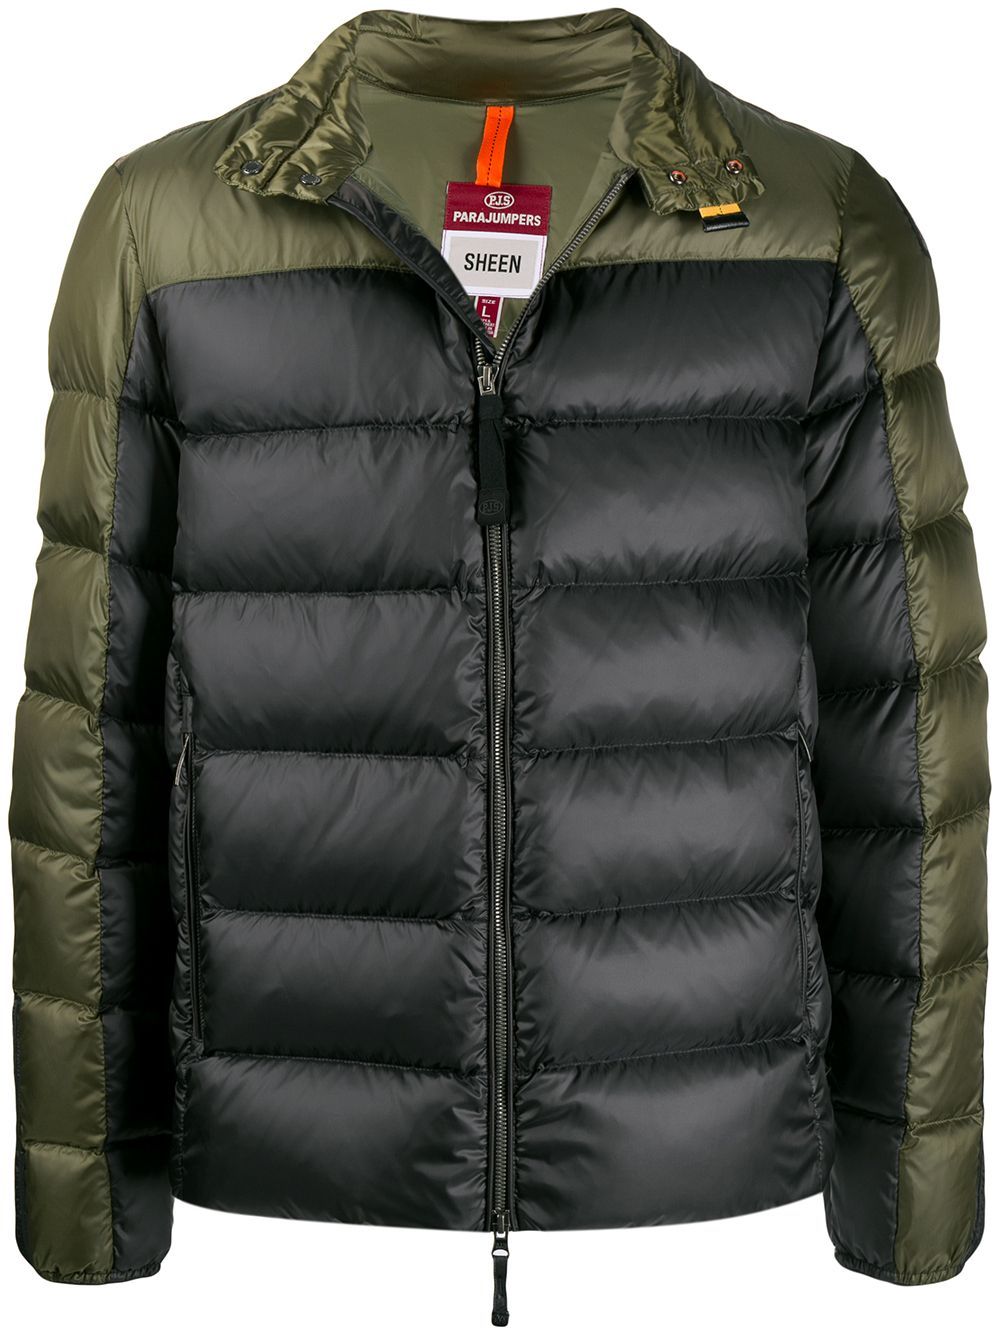 Puffer Jackets The 11 Best For Men Soft and warm, the layers of down or other air trapping material within the layers of a puffer jacket make it super insulating whilst. dillon bc puffer jacket